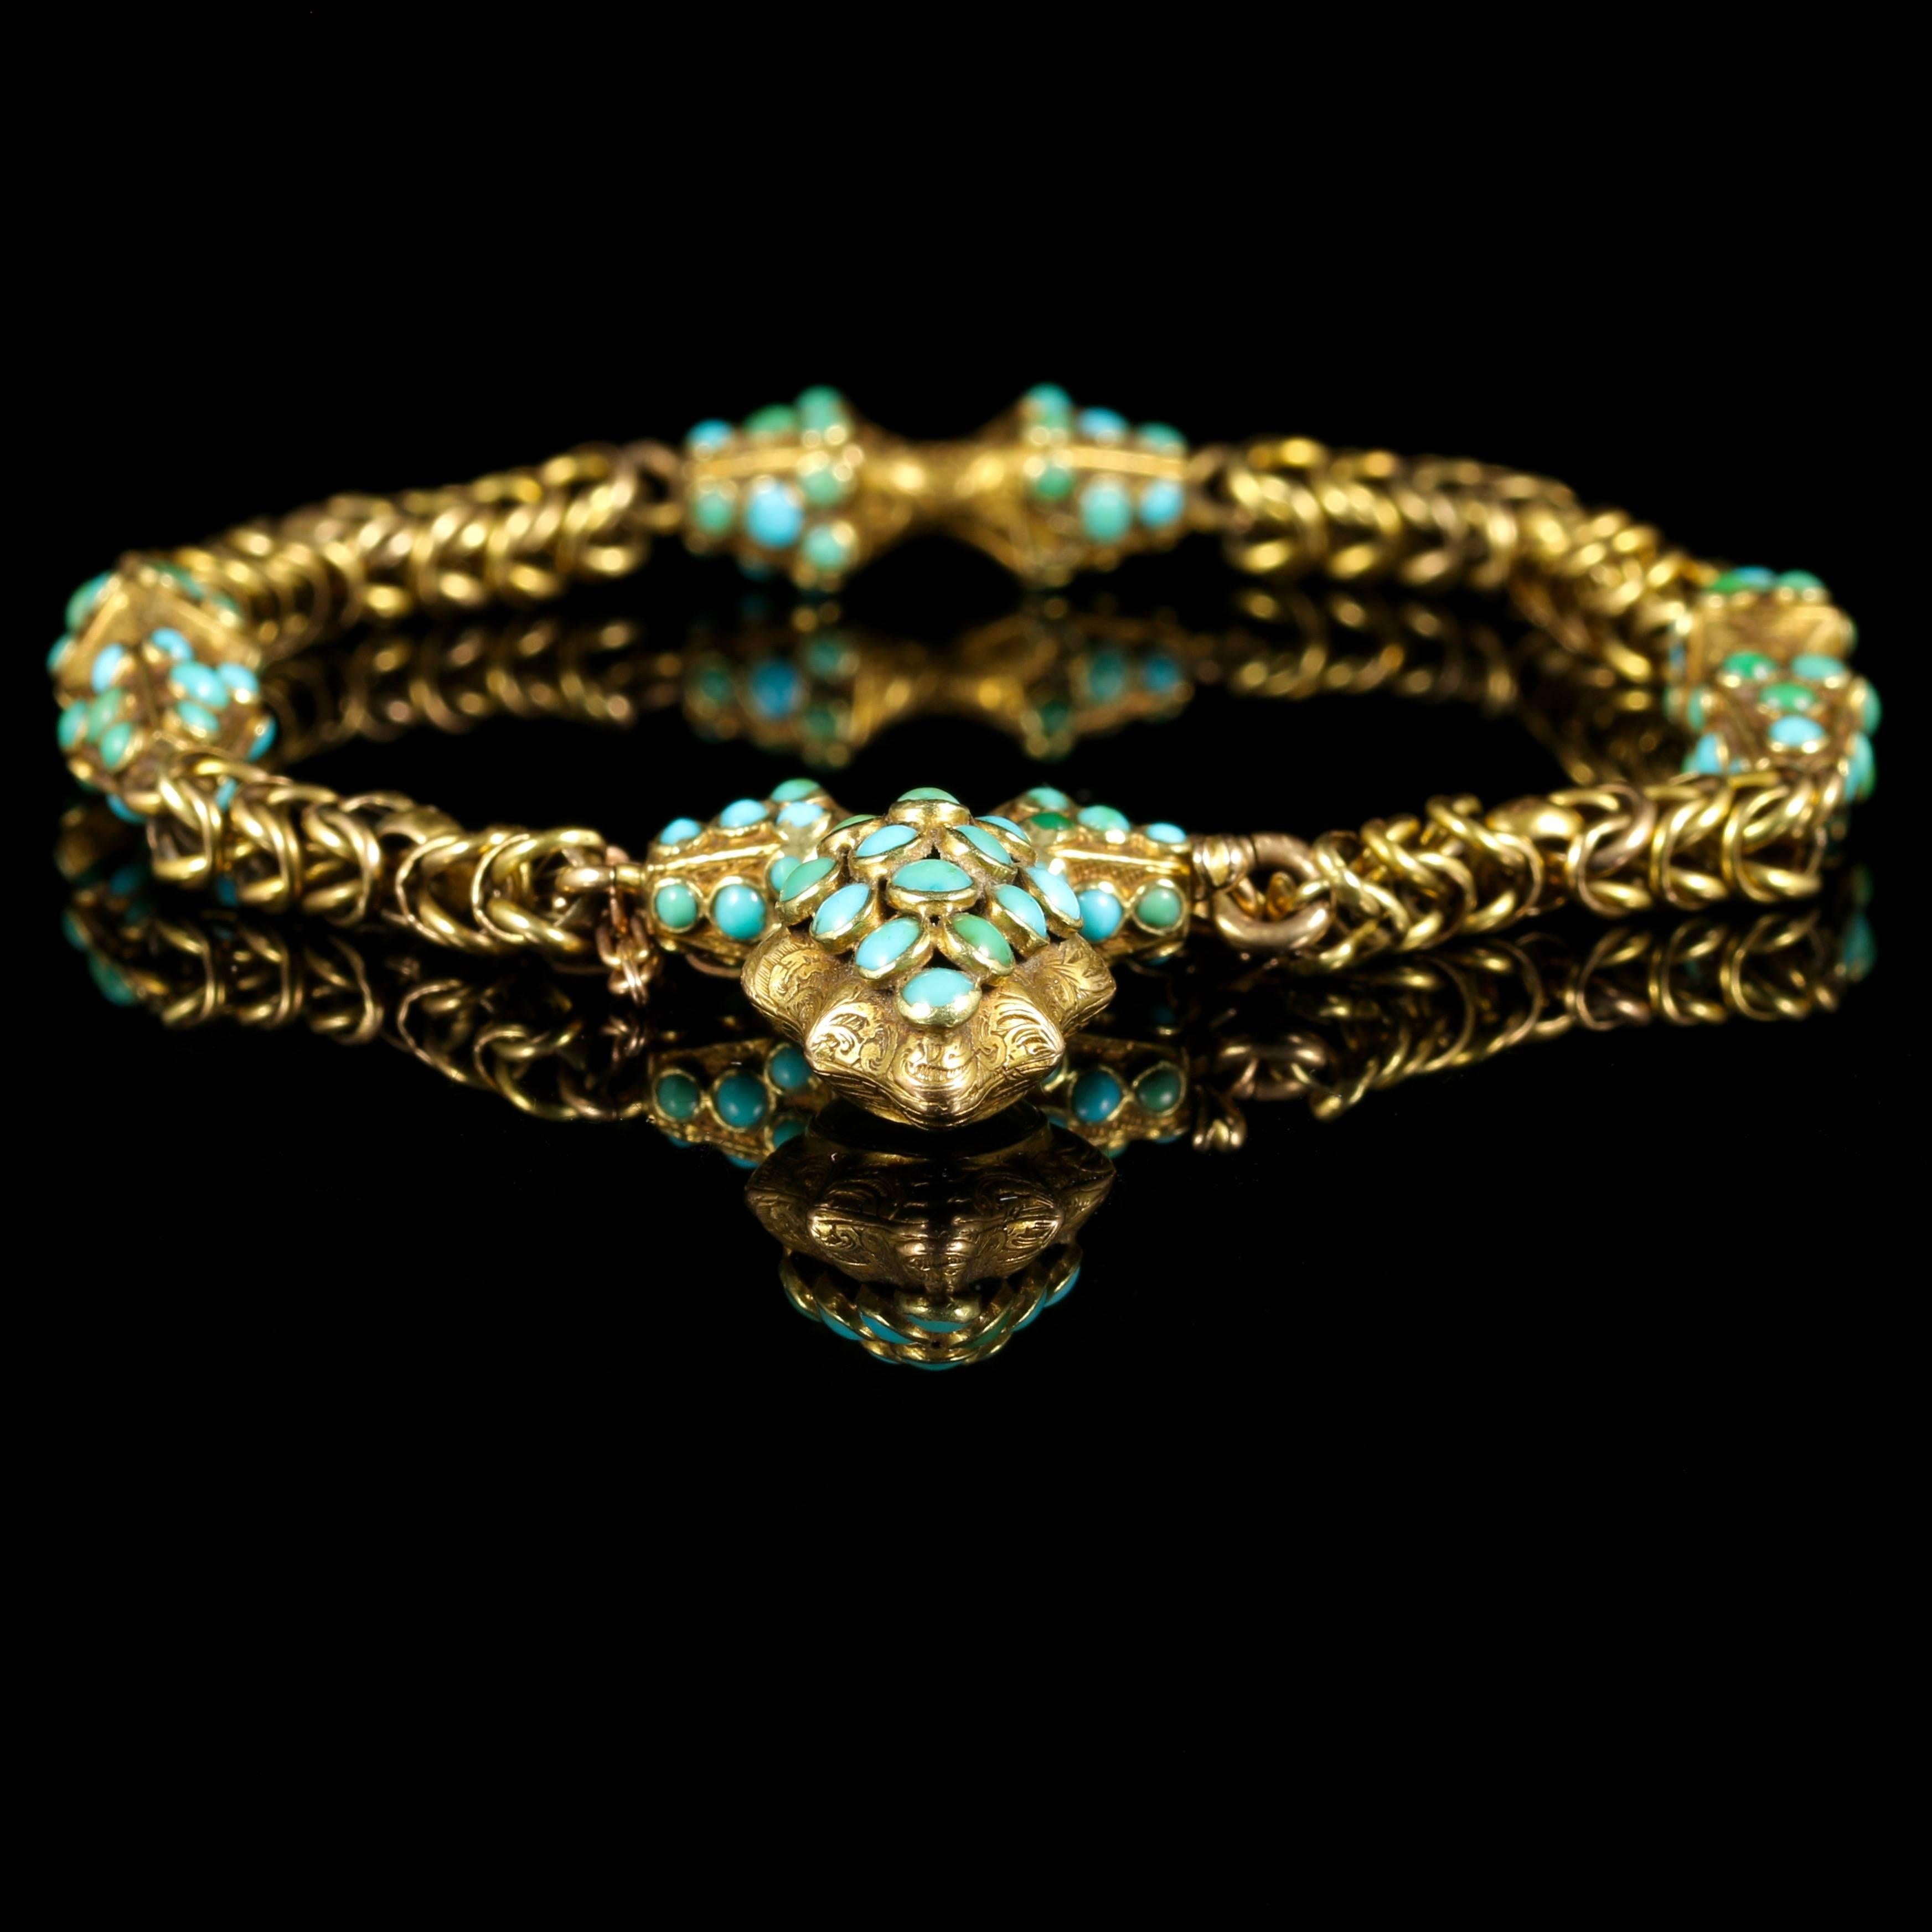 This very beautiful Georgian boxed 18ct Gold bracelet is adorned with Turquoises, Circa 1800.

Fabulous Georgian workmanship all round, intricate detail with Turquoise sections.

The bracelet is in its original box, a lovely deep maroon plush Velvet